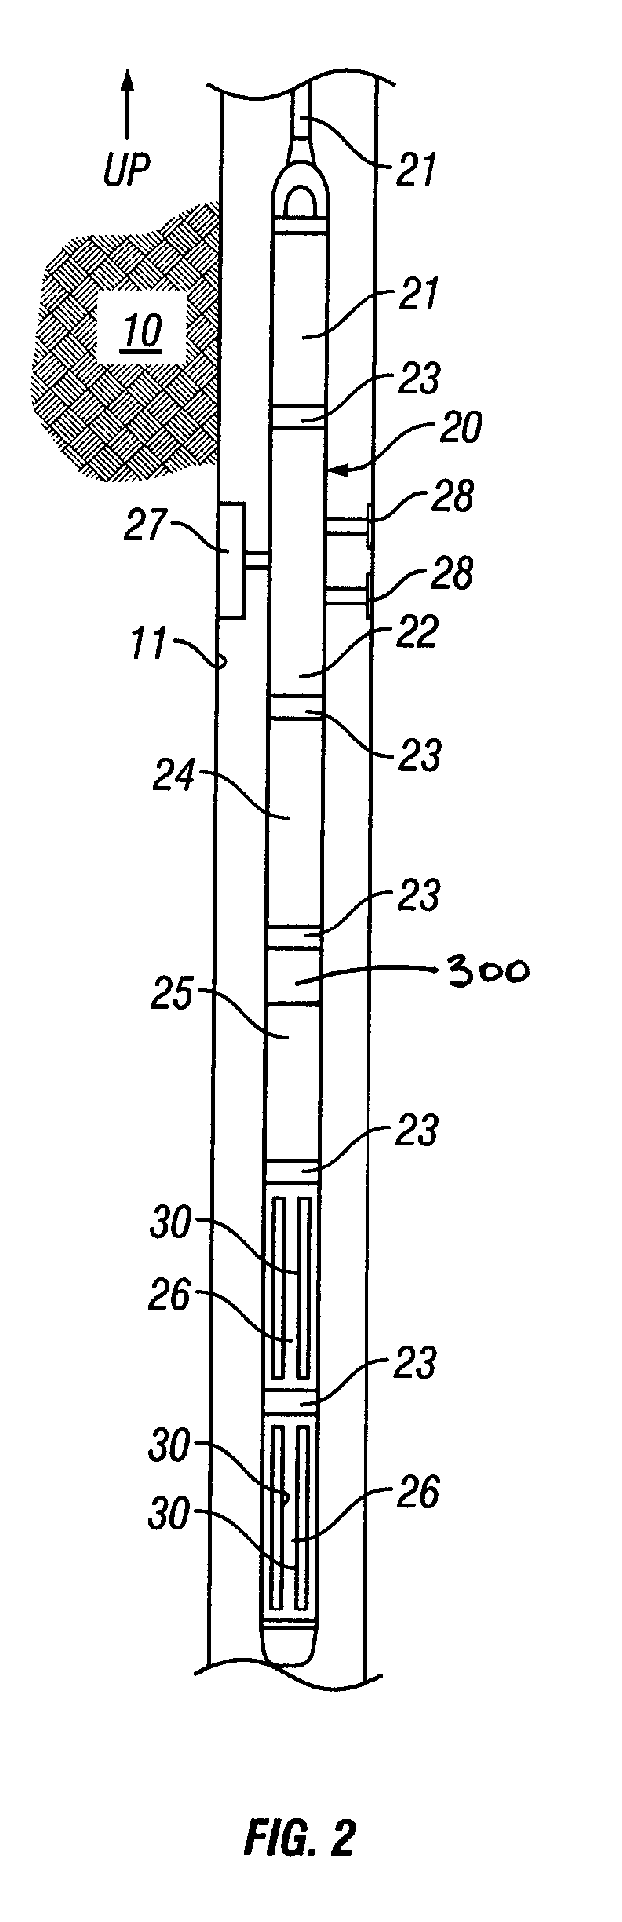 Method and apparatus for an optimal pumping rate based on a downhole dew point pressure determination